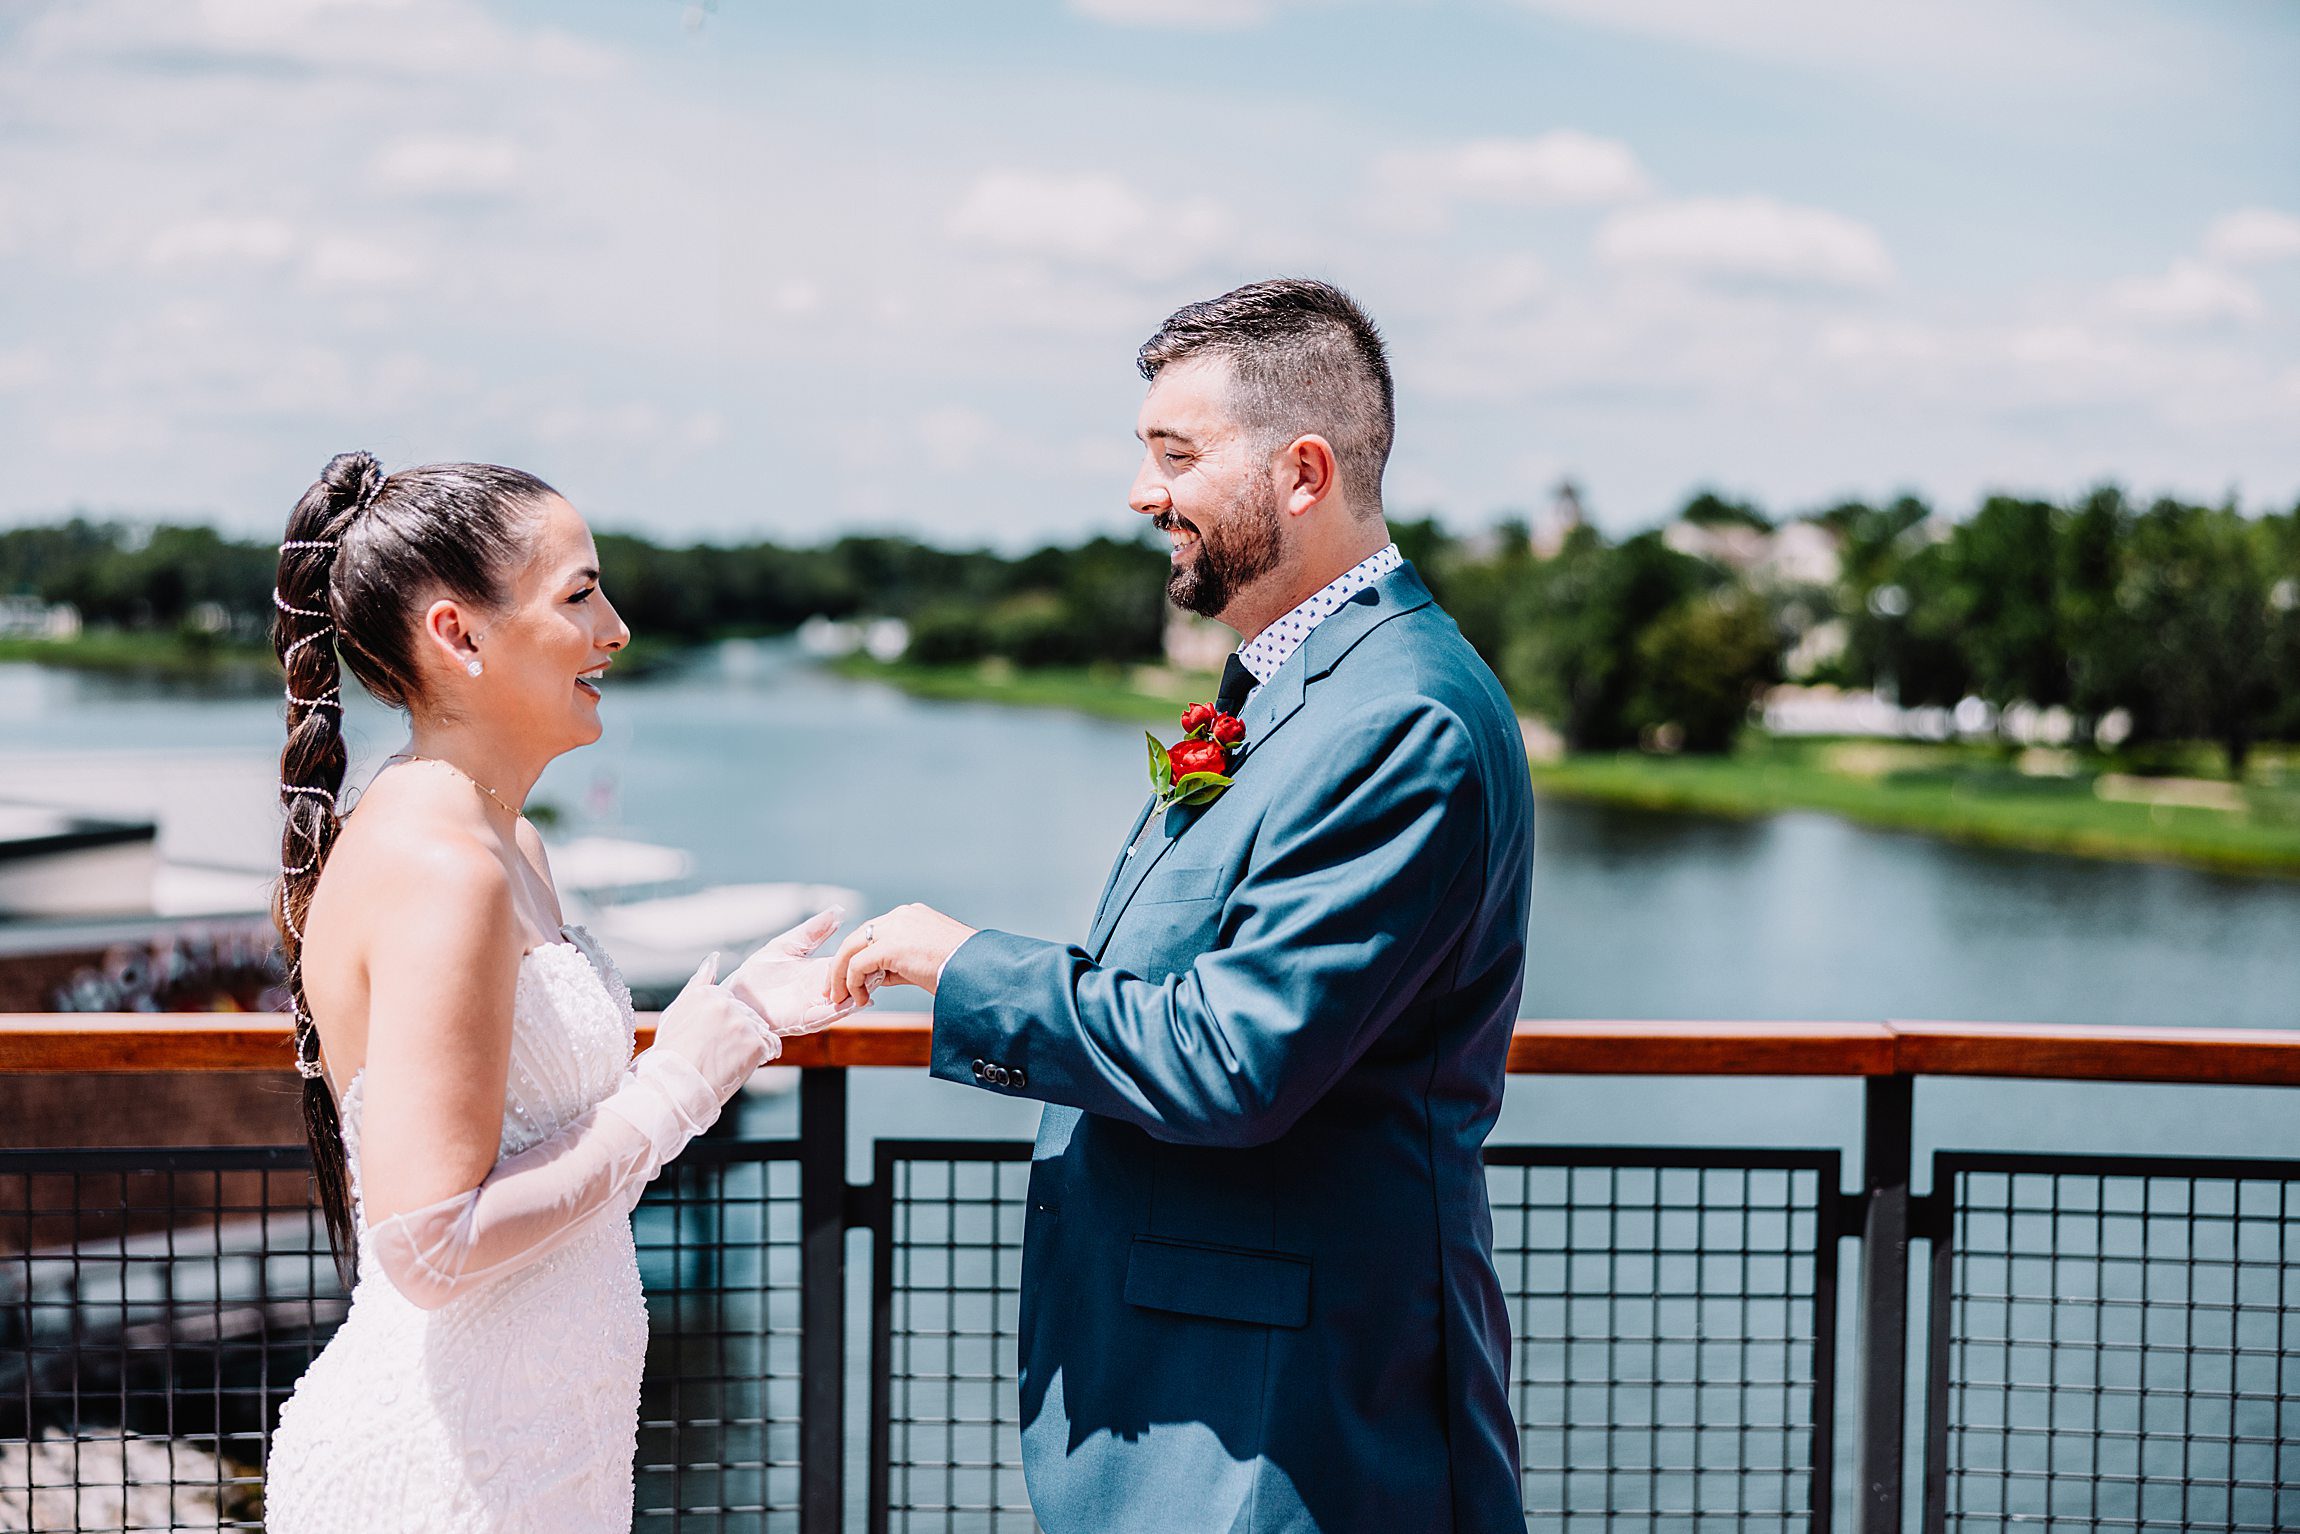 Couple getting married on the balcony of paddlefish restaurant at disney springs in orlando florida